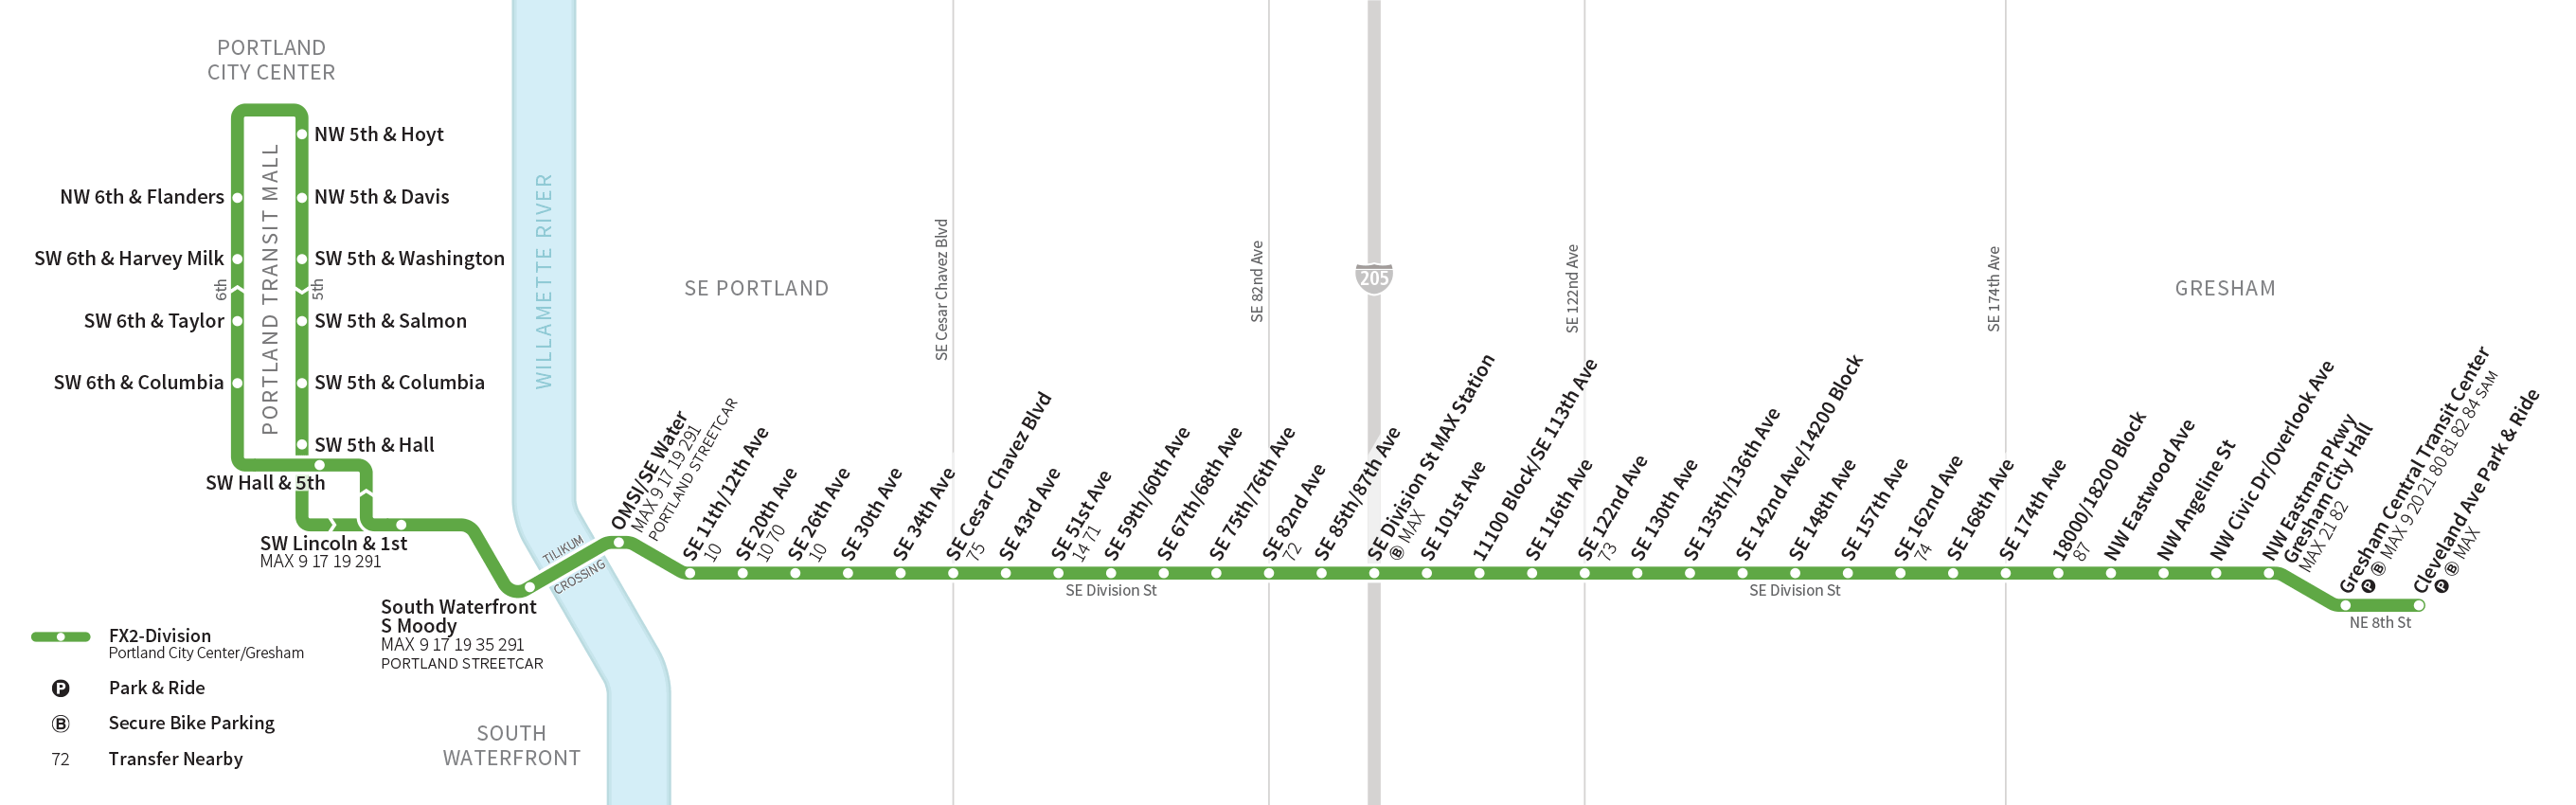 FX2-Division route map